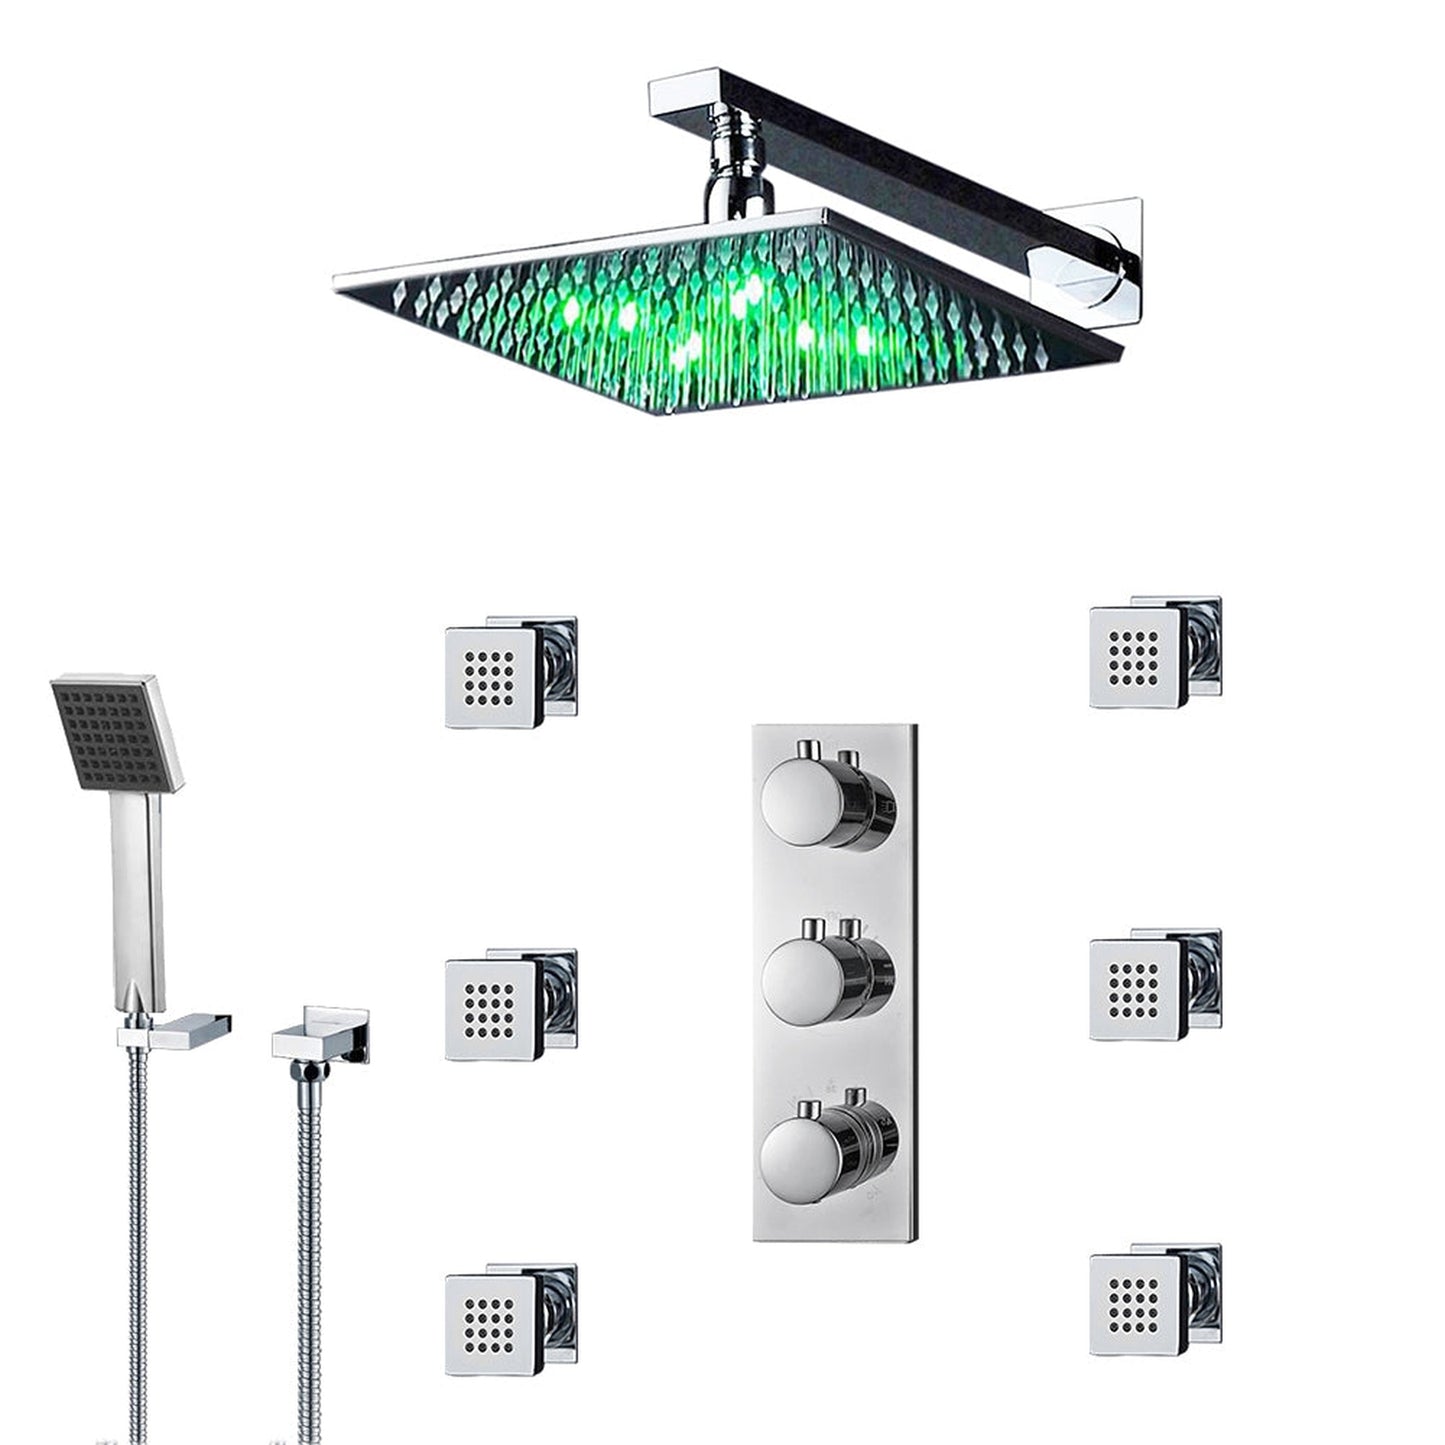 Fontana Trialo 12" Polished Chrome Square Wall-Mounted Color Changing LED Shower System With Thermostatic Mixer, Adjustable 6-Body Jets and Hand Shower